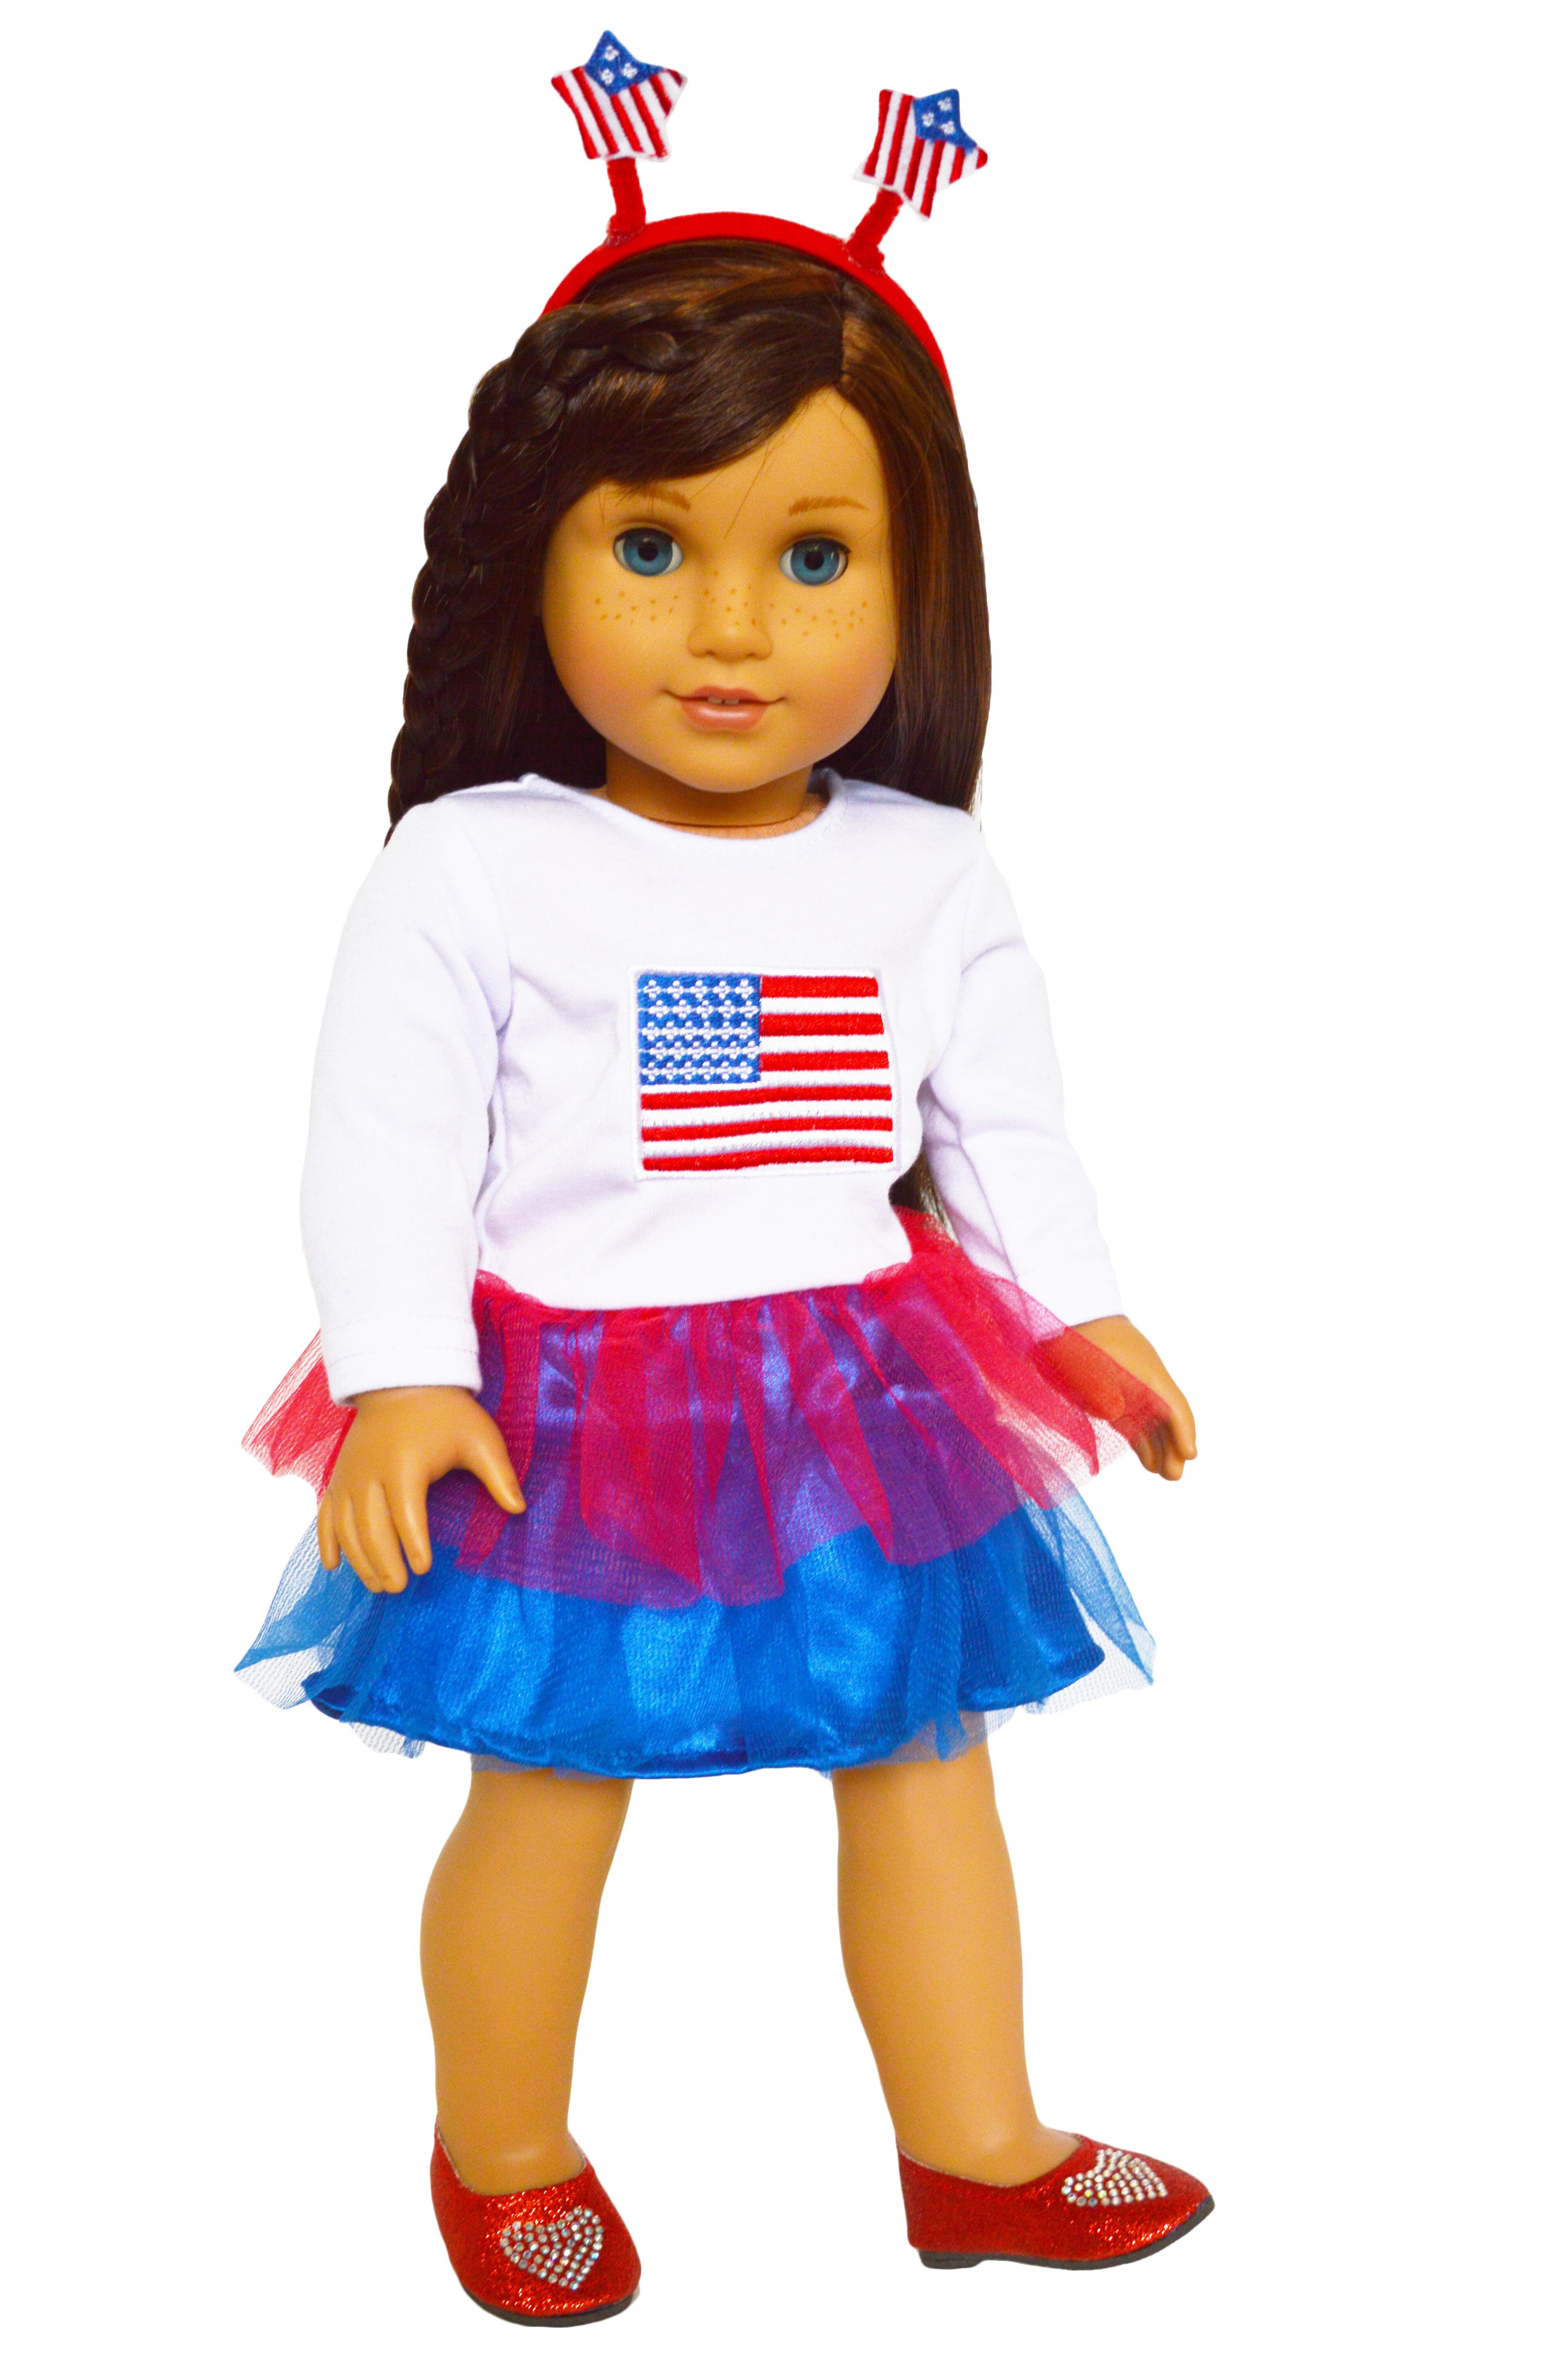 18 Inch Doll Clothes- All American Patriotic Outfit Fits American Girl